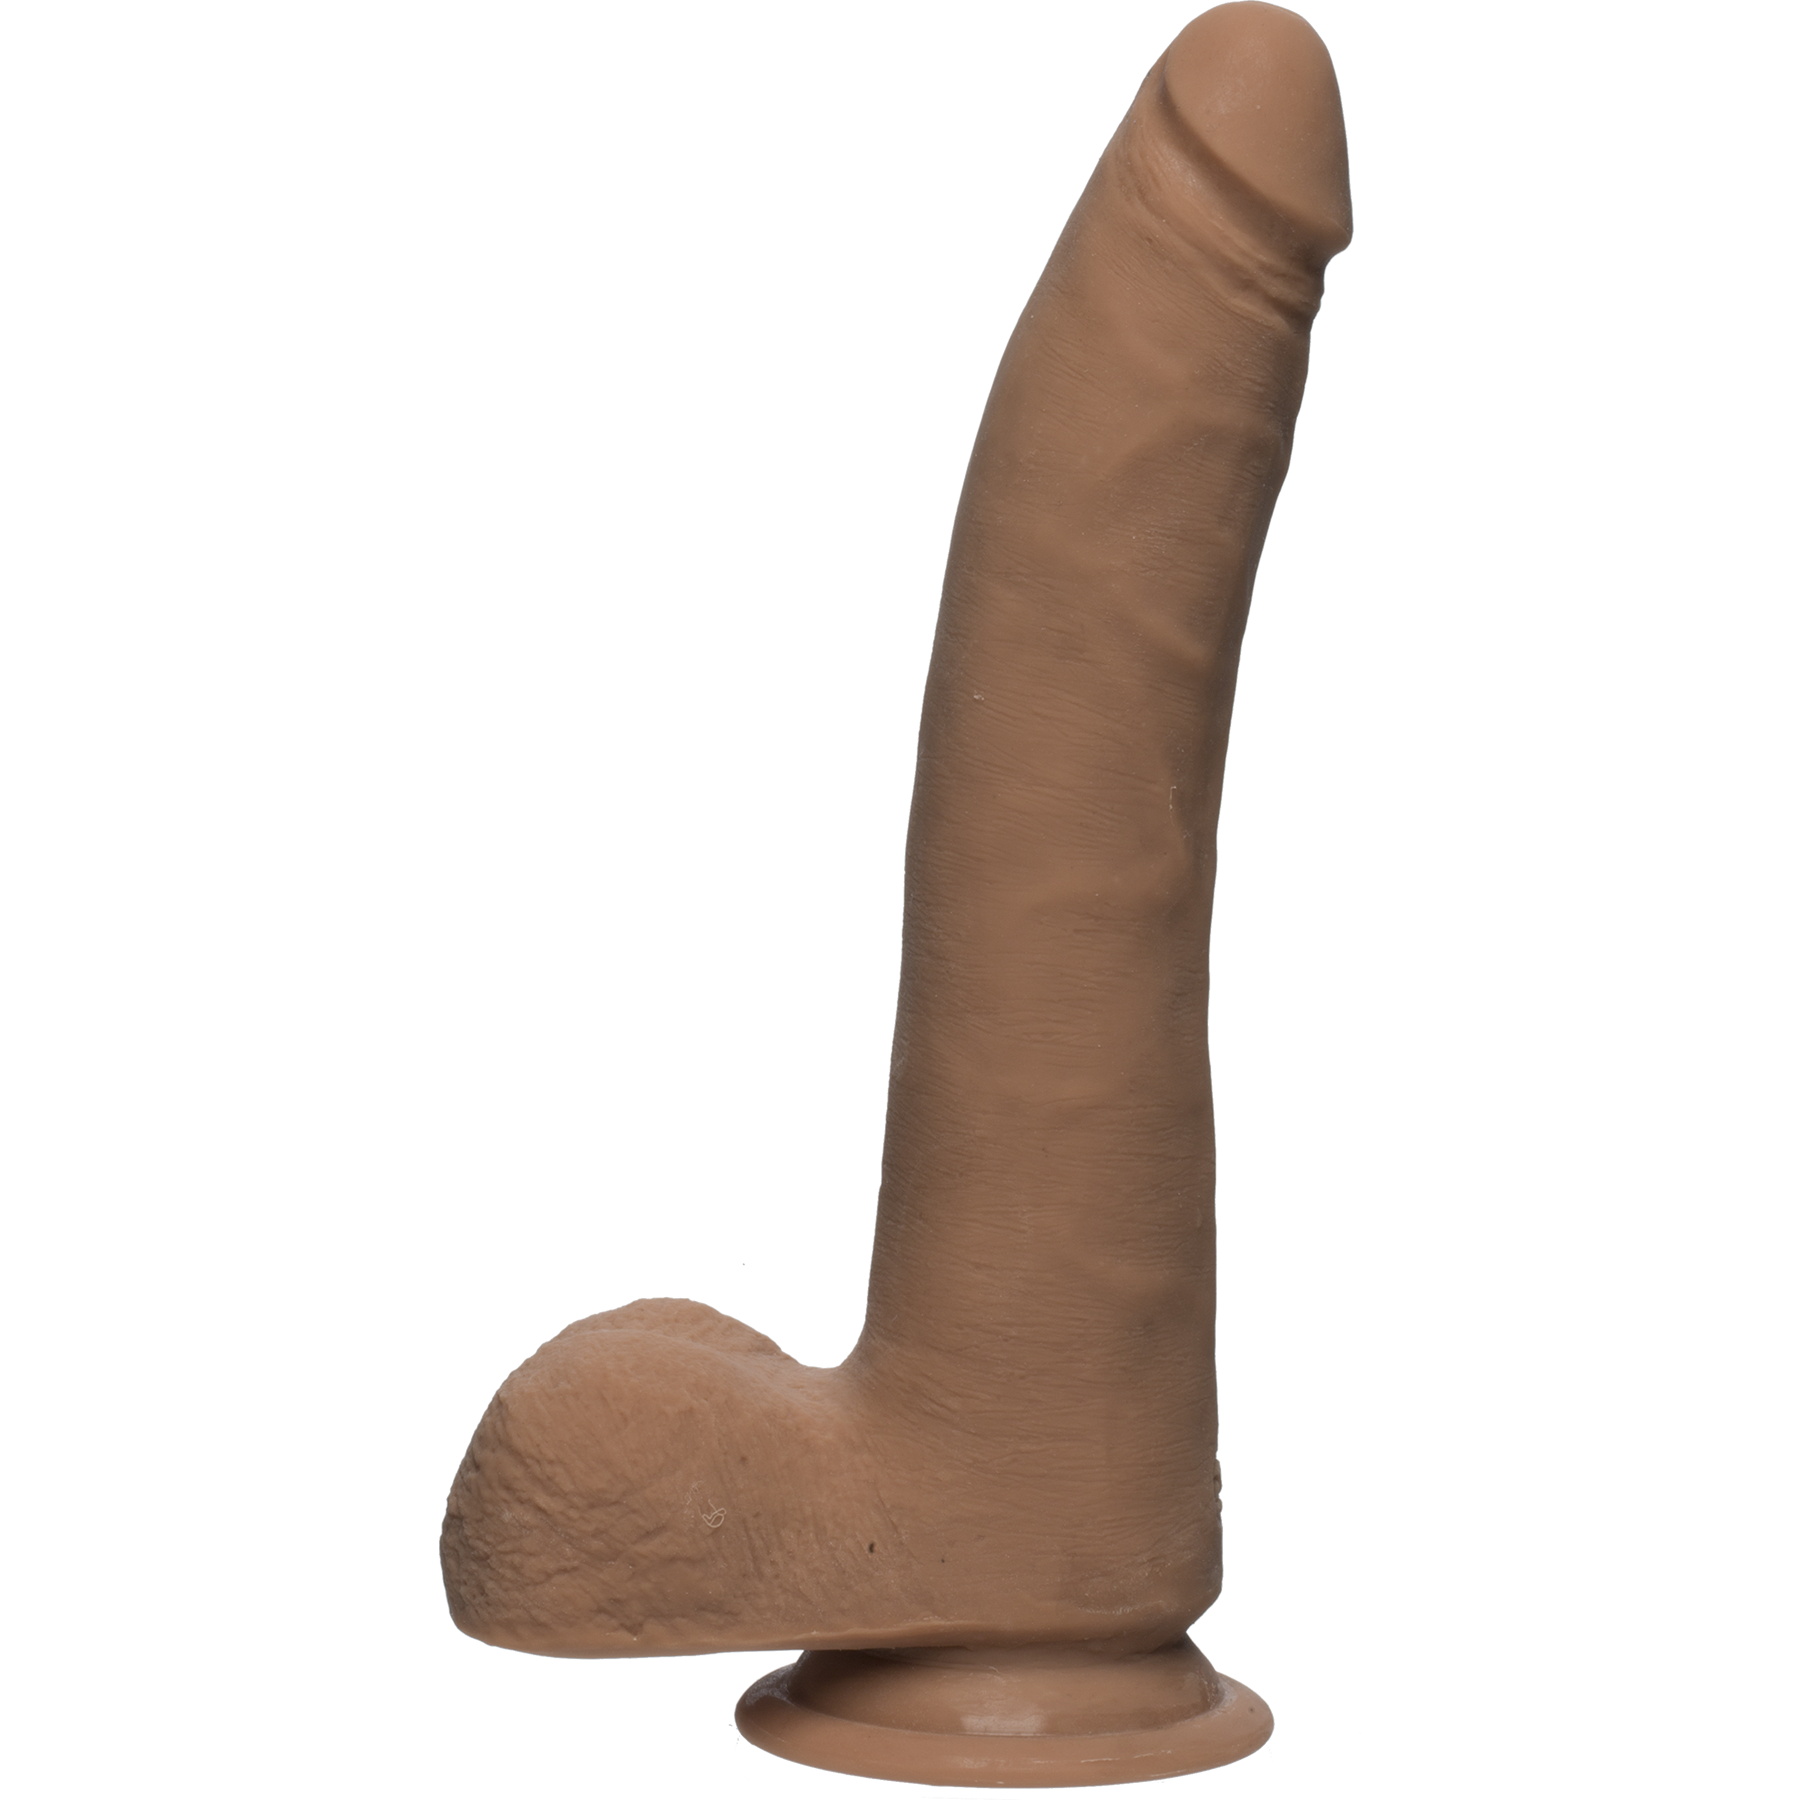 The+D+Realistic+D+Slim+With+Balls+Dual+Density+Dildo